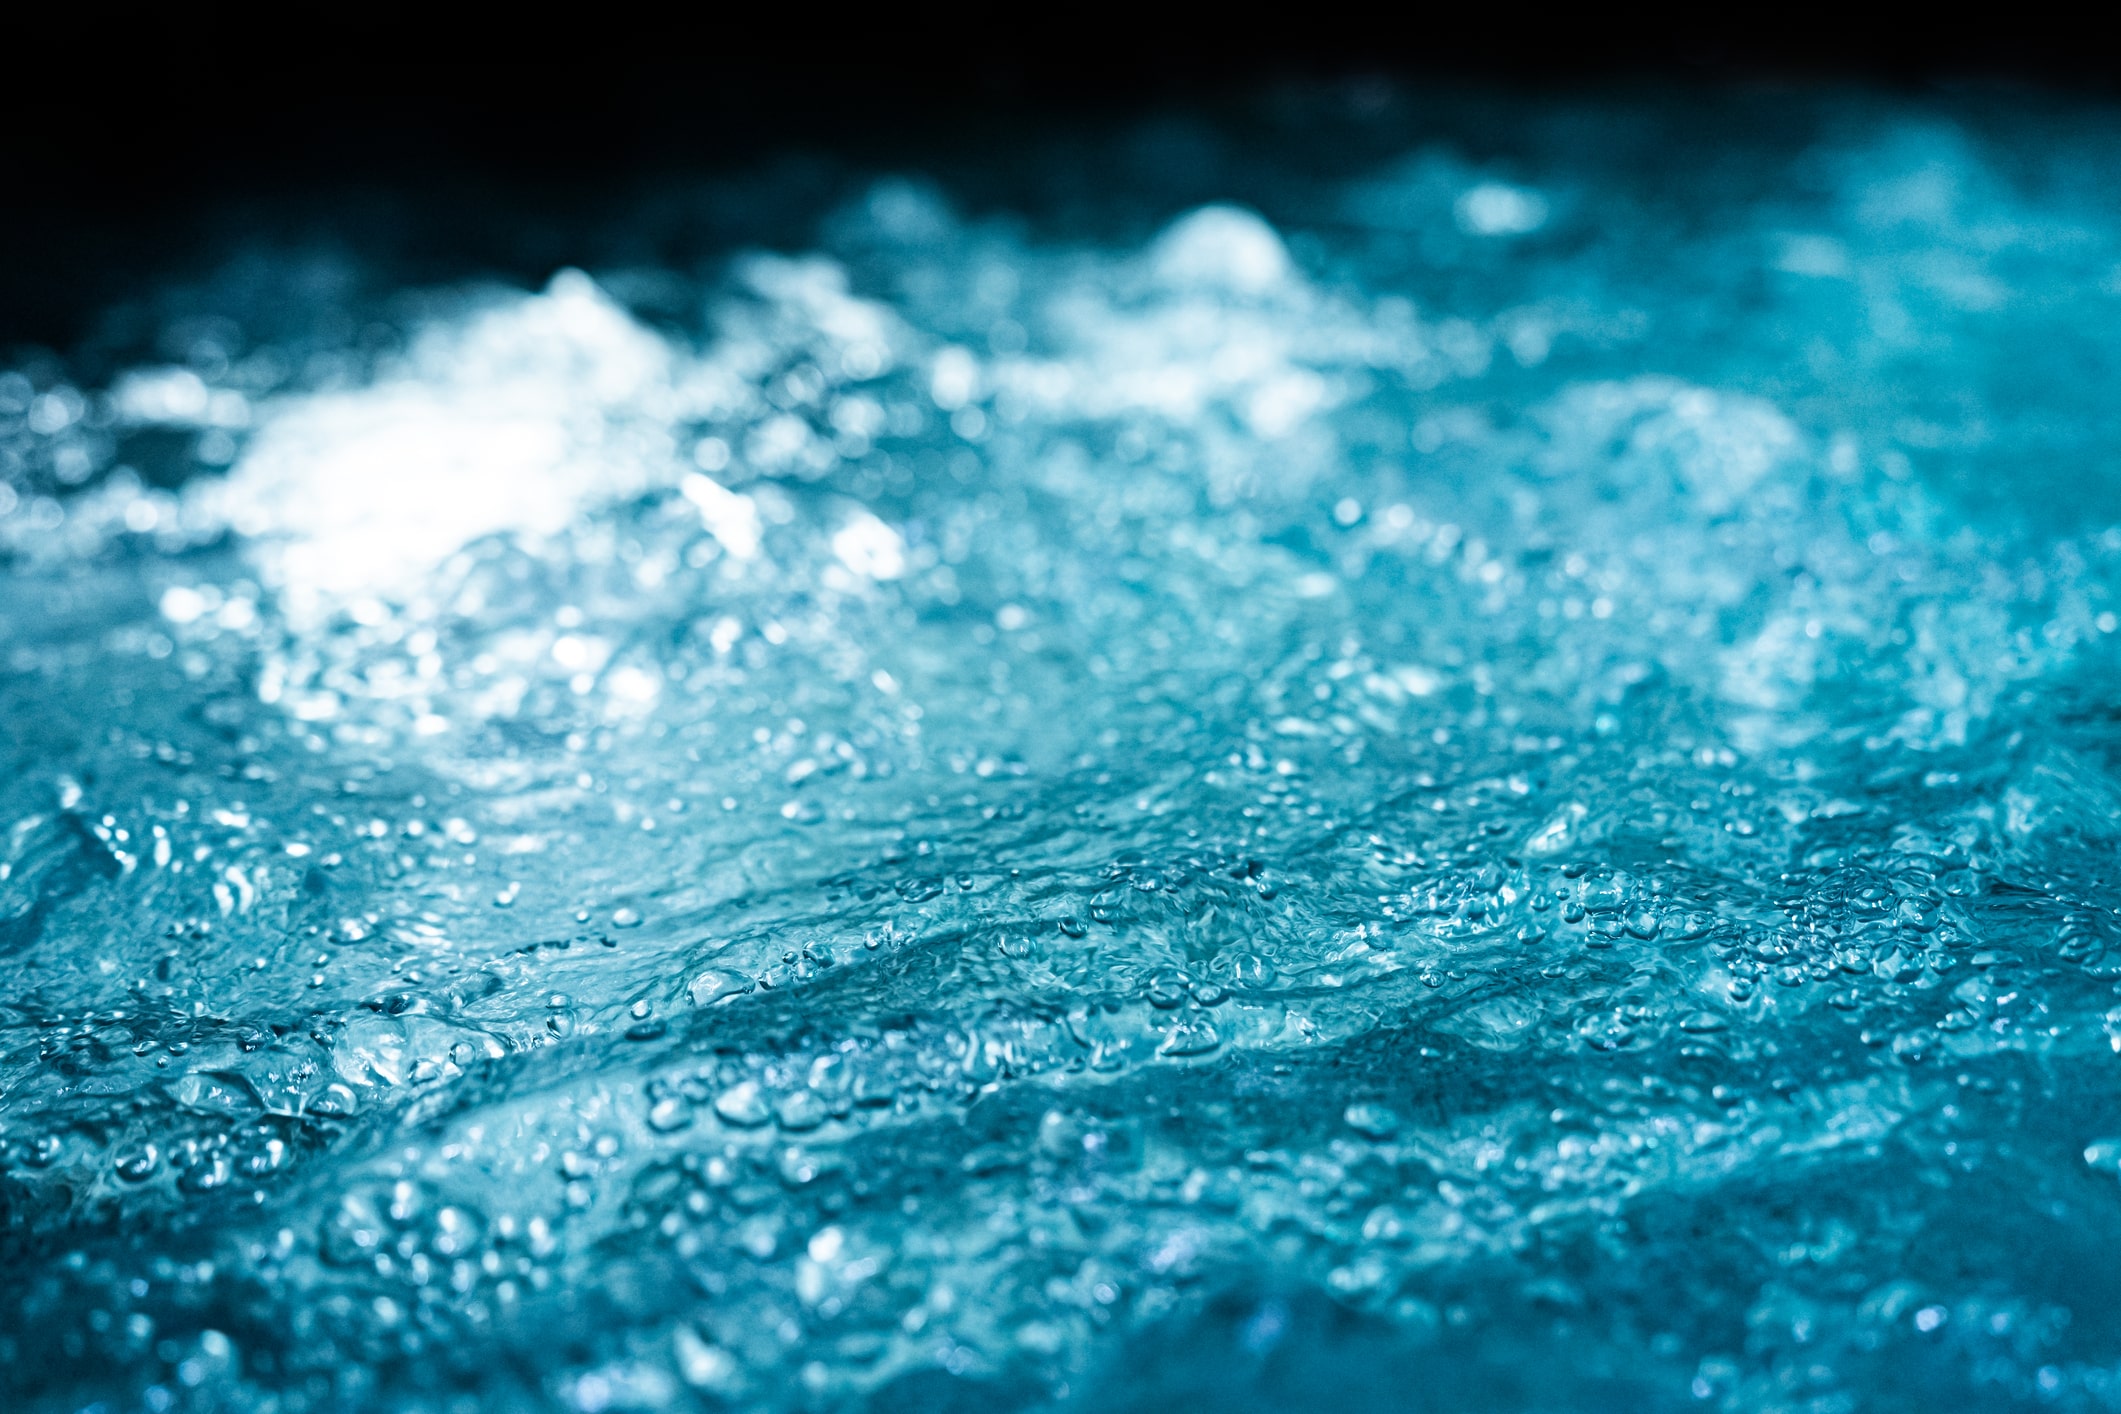 swirling blue waters of an ice bath used for cold water therapy